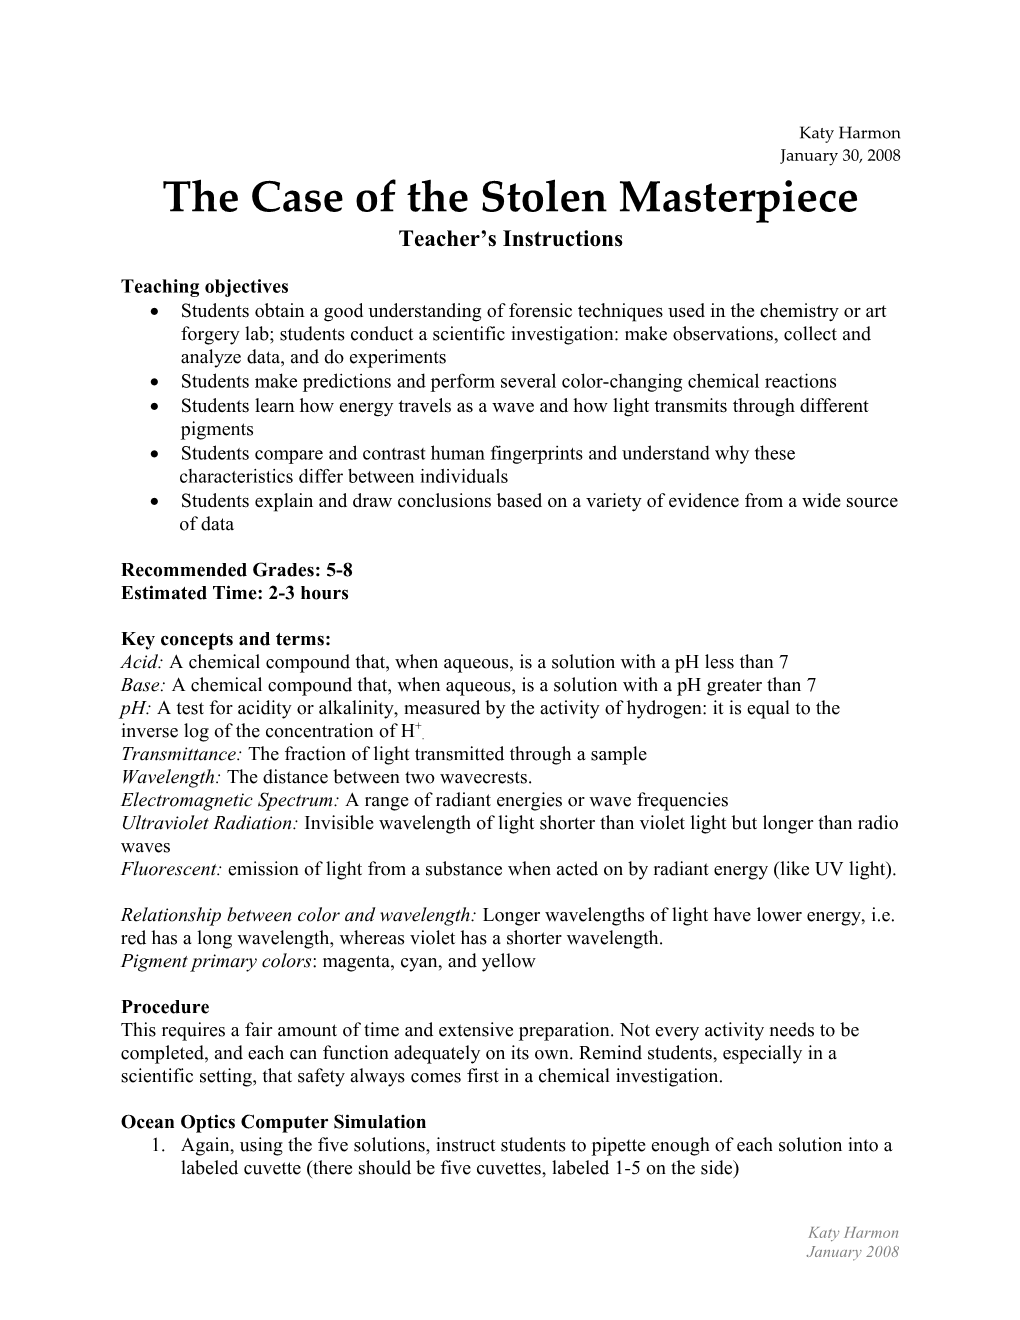 The Case of the Stolen Masterpiece